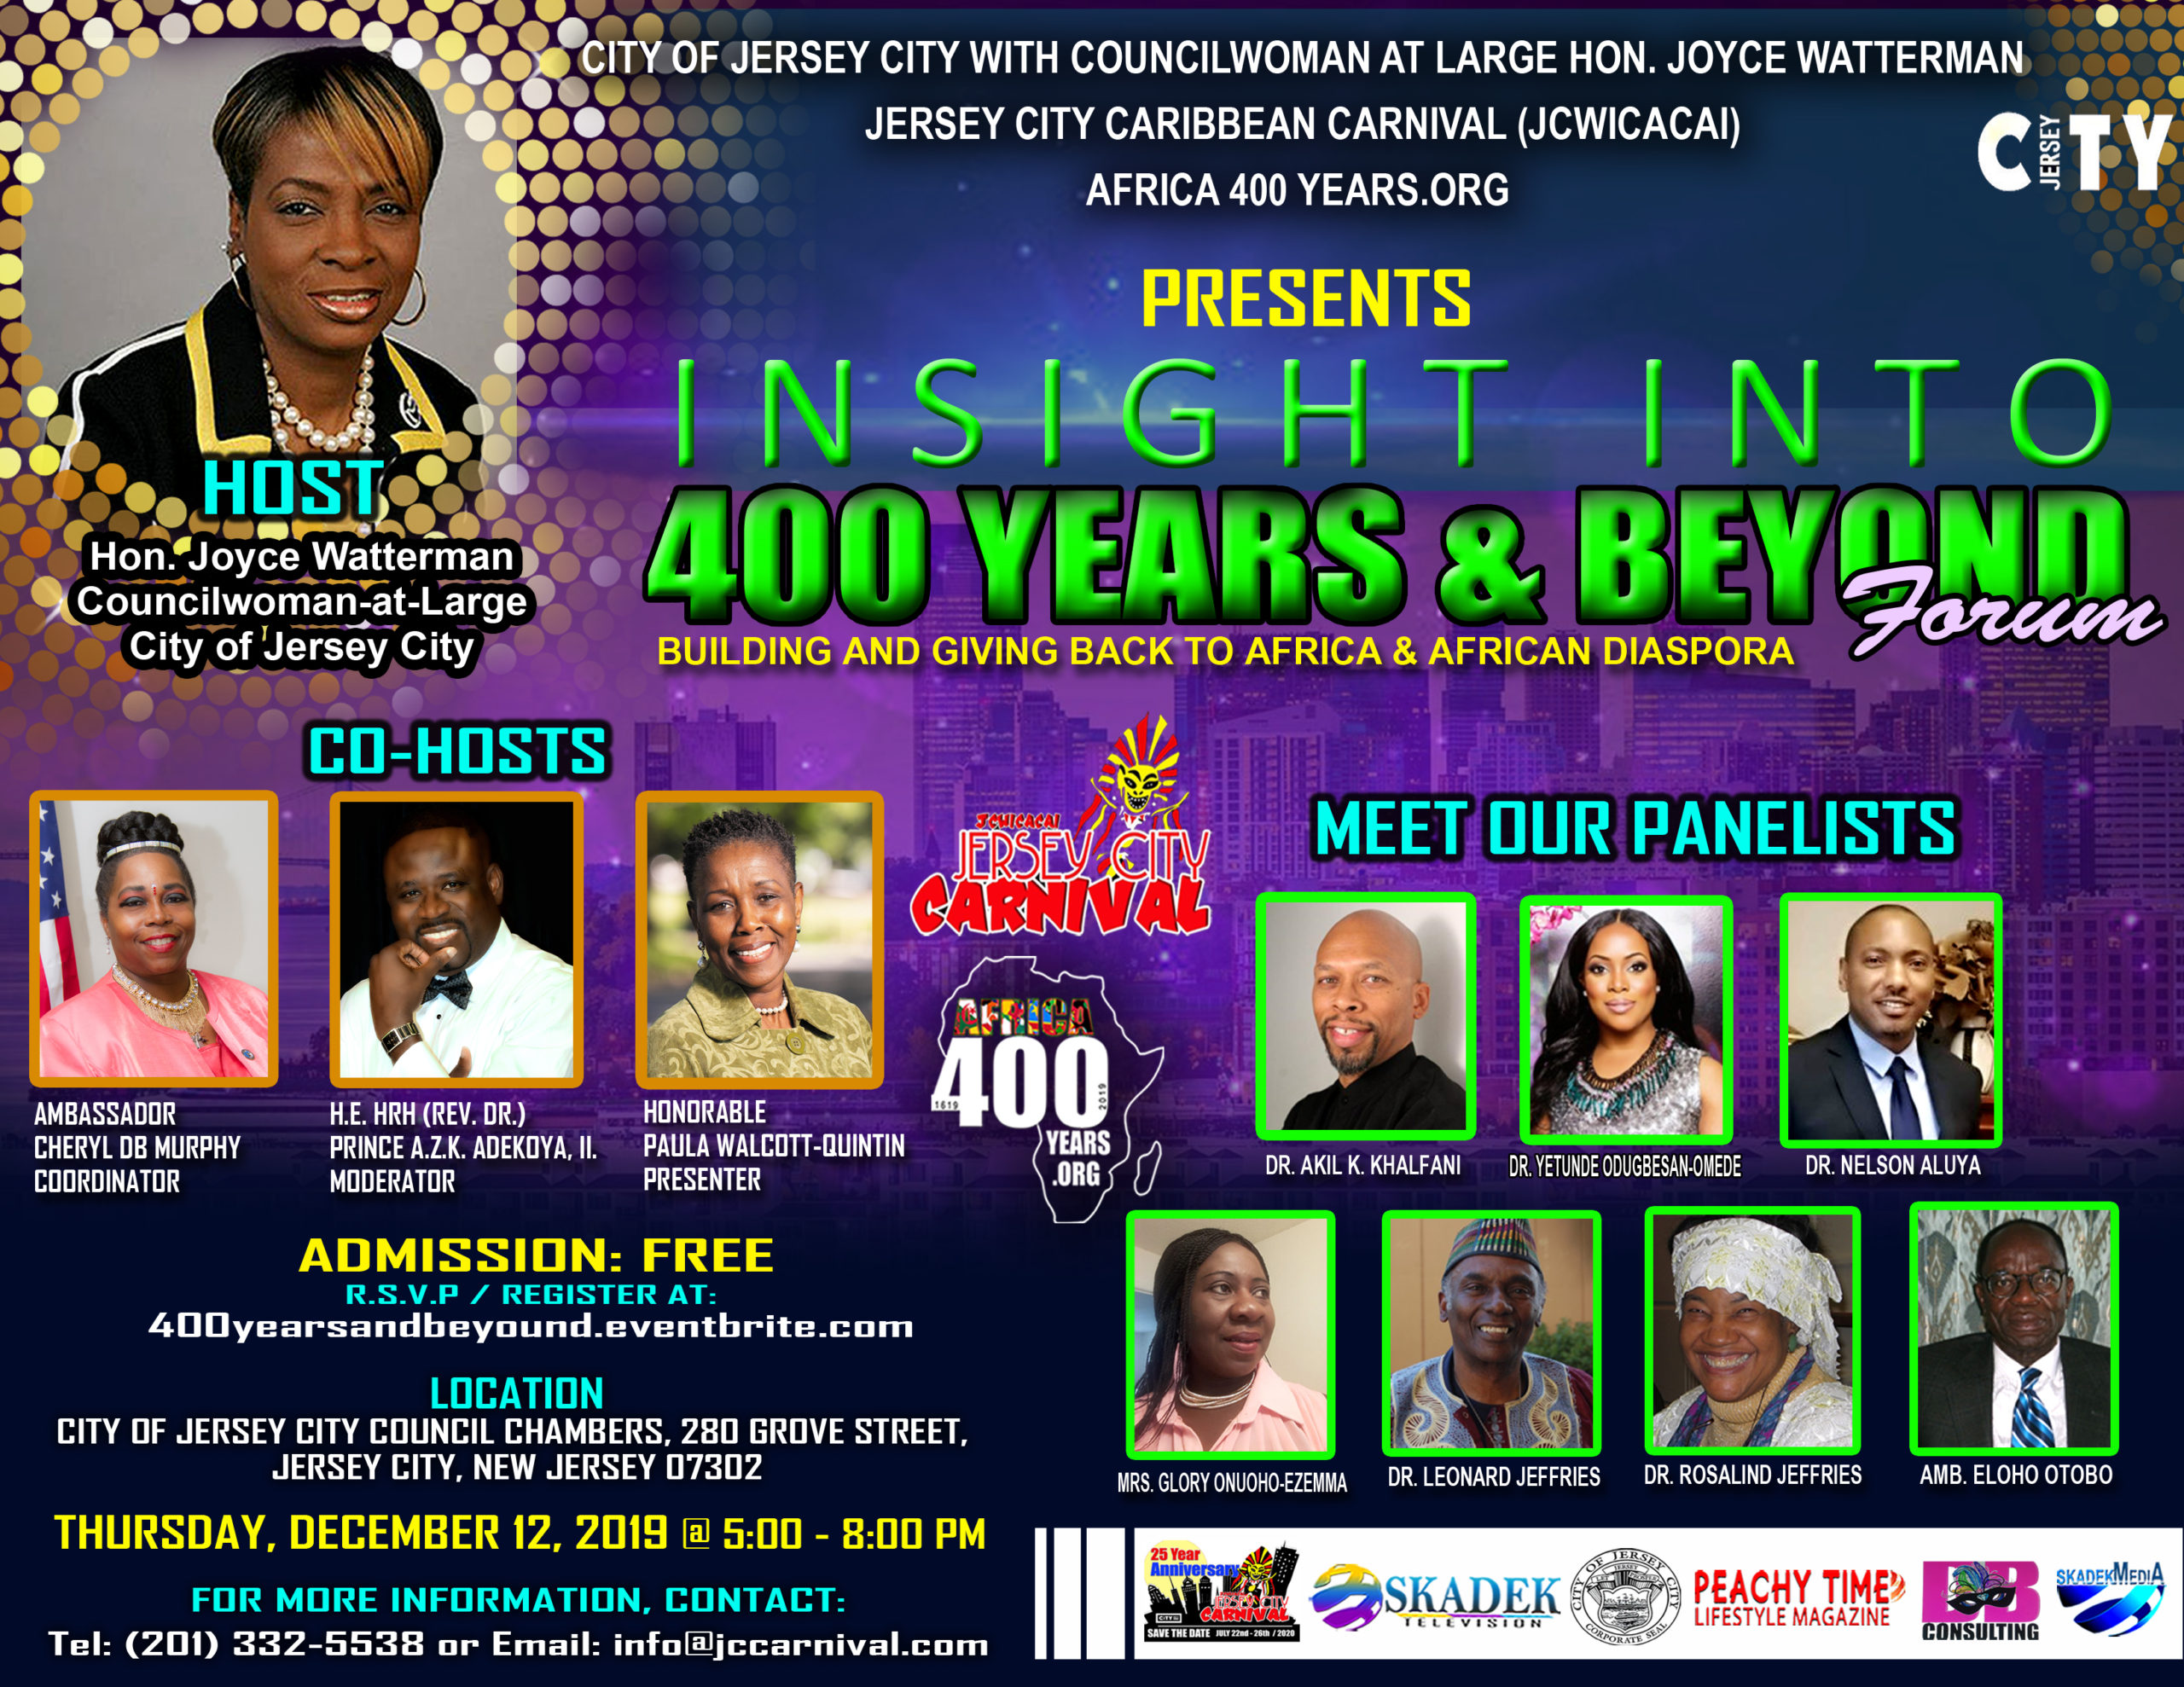 Insight Into 400 Years & Beyond Seminar - HOST, CO-HOSTS & PANELISTS